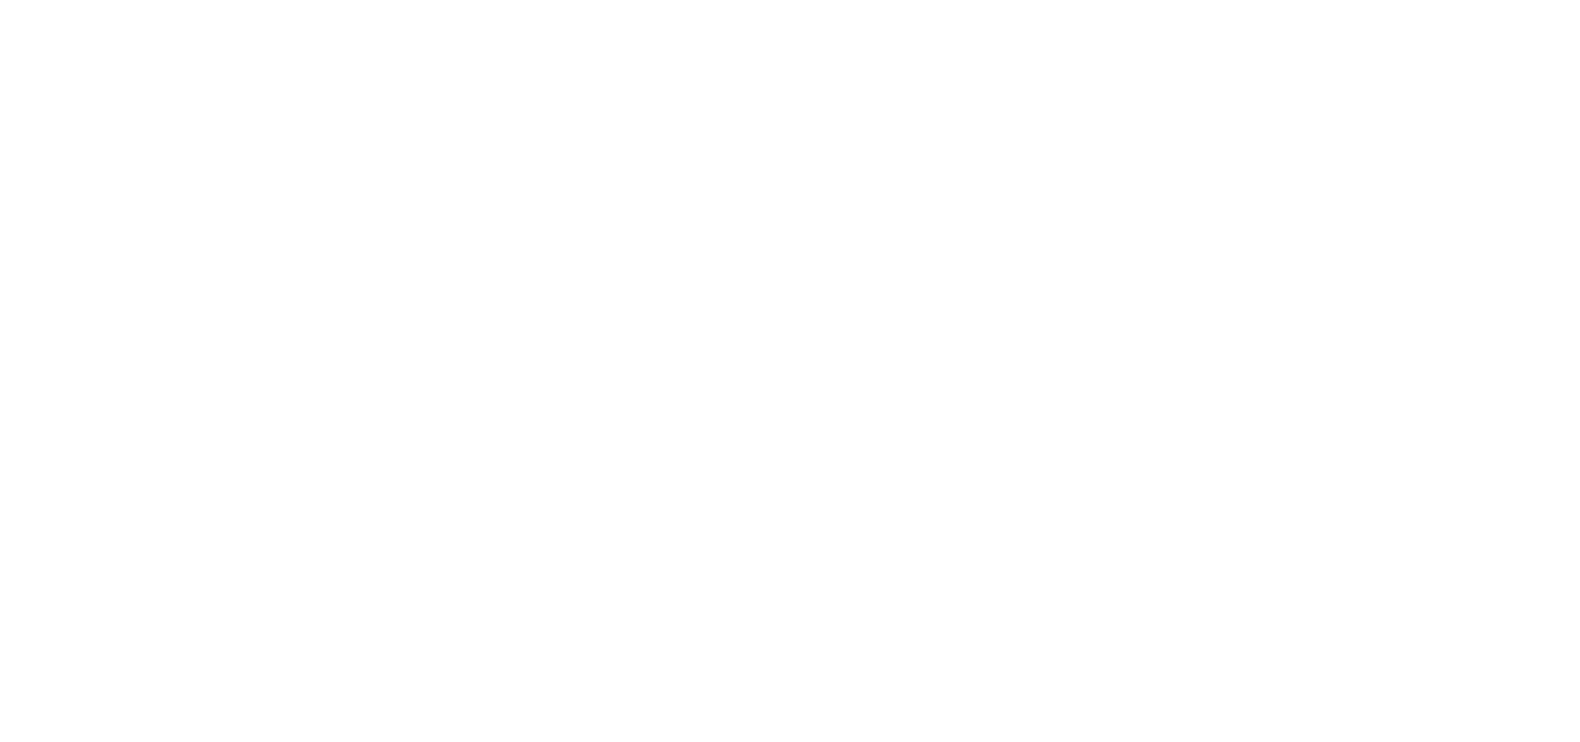 Loblaw Companies logo large for dark backgrounds (transparent PNG)